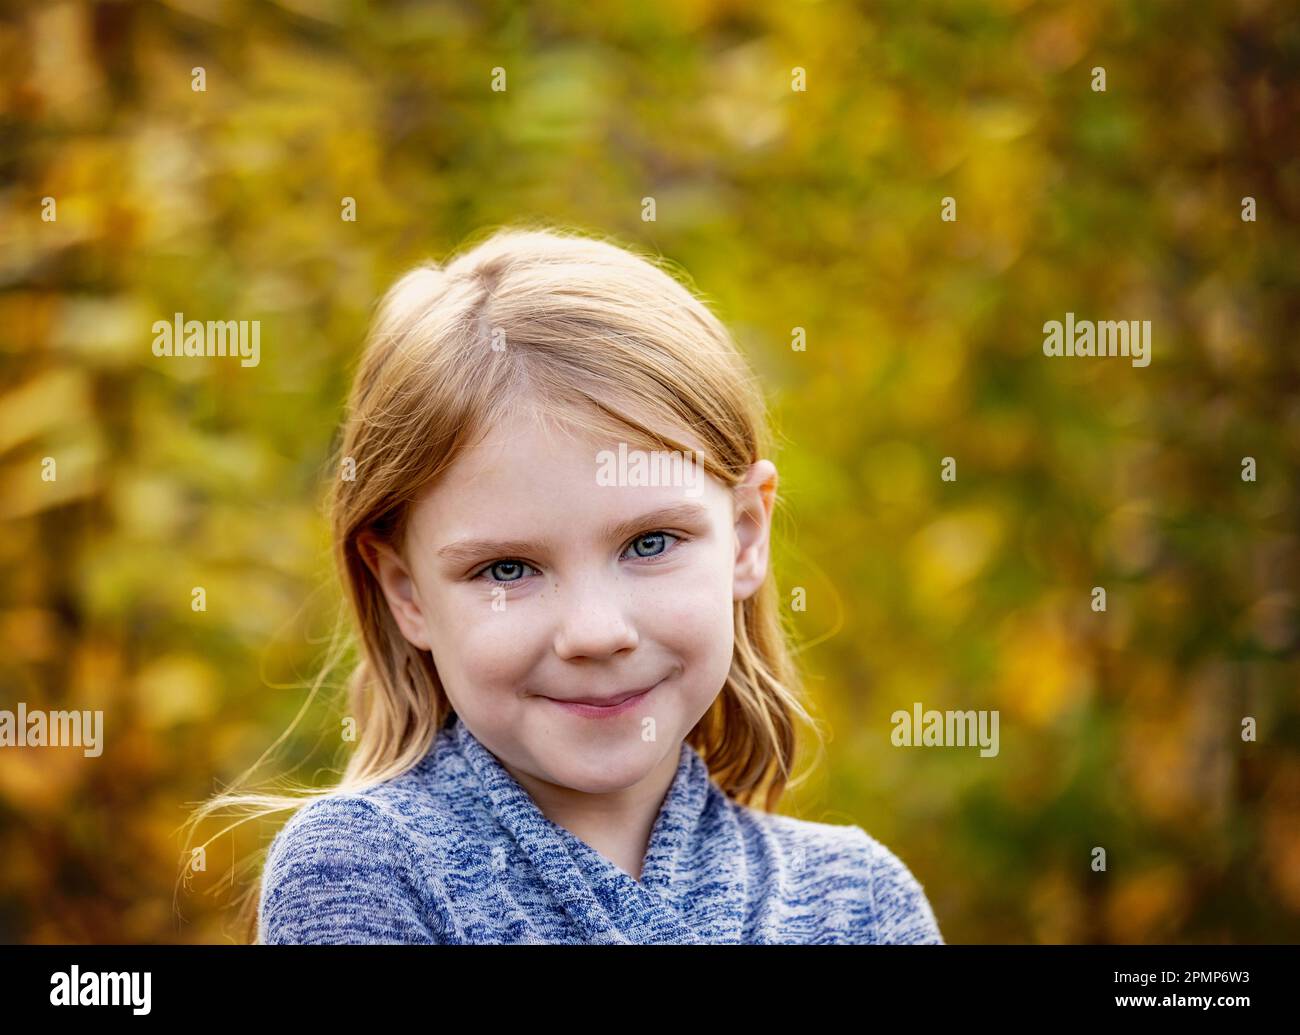 Outdoor portrait of a girl with blue eyes and blond hair in autumn; Edmonton, Alberta, Canada Stock Photo